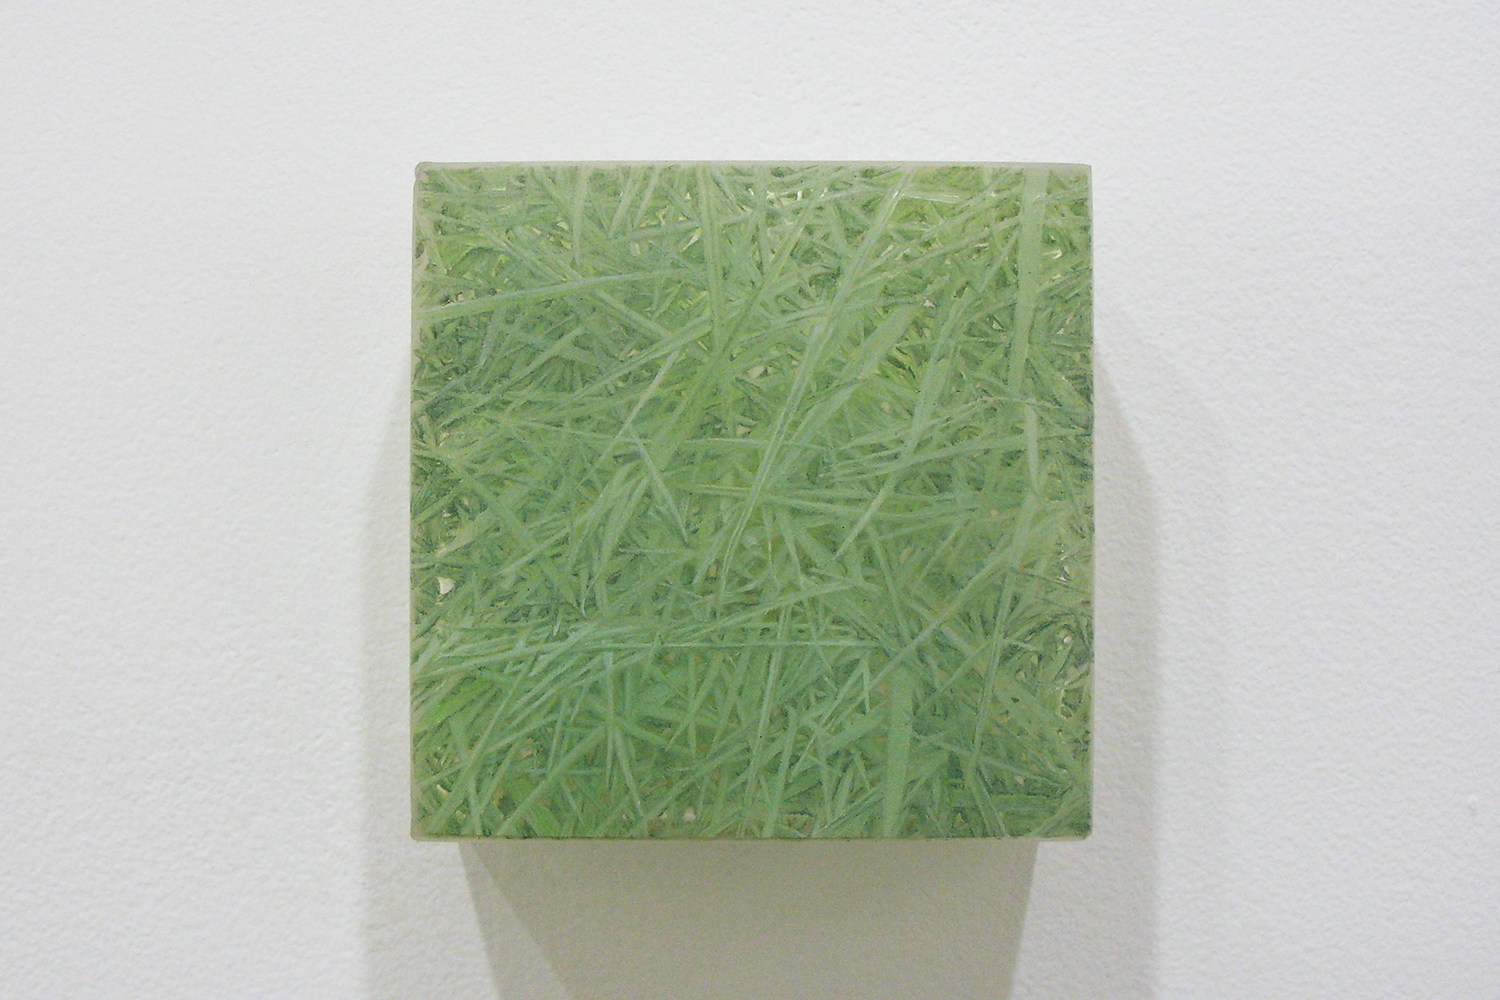 Photo-painting 草上のかおり｜Scent on the grass ｜7.5 x 7.5 x 3 cm｜Oil on FRP, mixed media｜ 2009<br>¥50,000 - 200,000